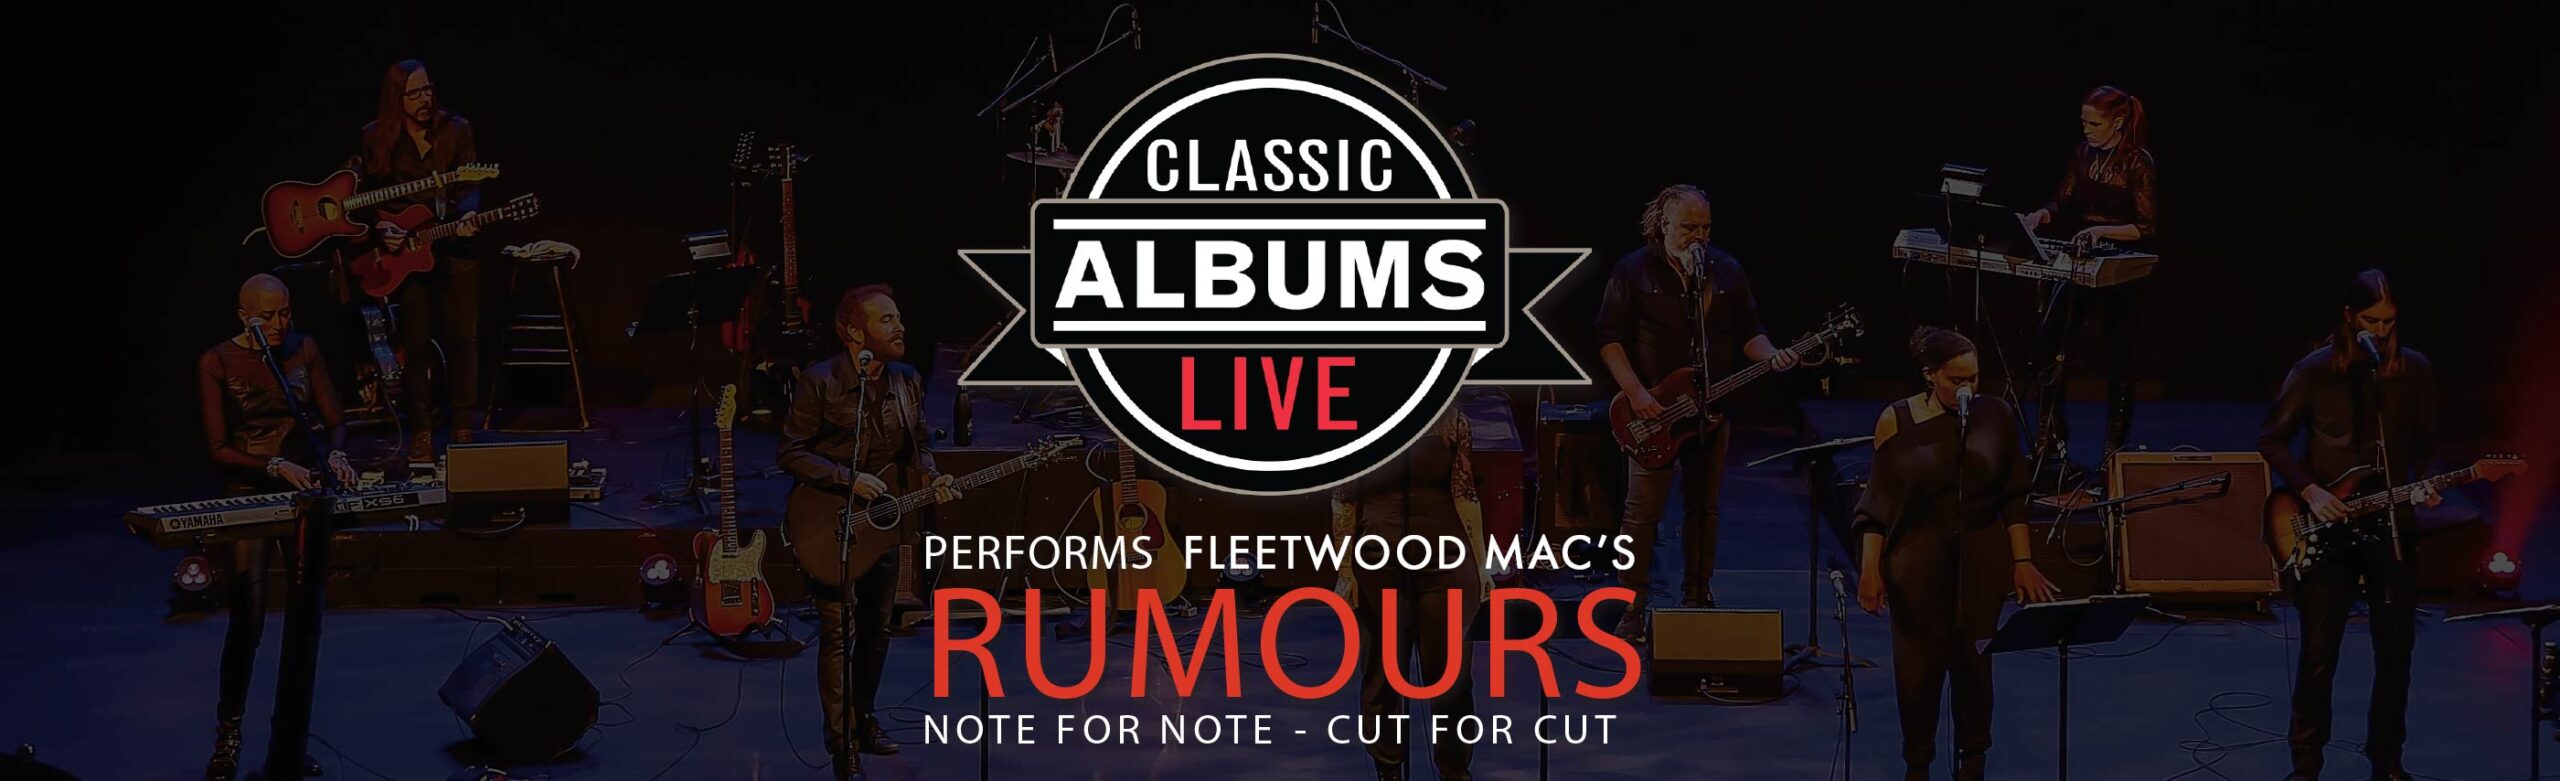 Classic Albums Live to Perform Fleetwood Mac’s “Rumours” at The Wilma Image